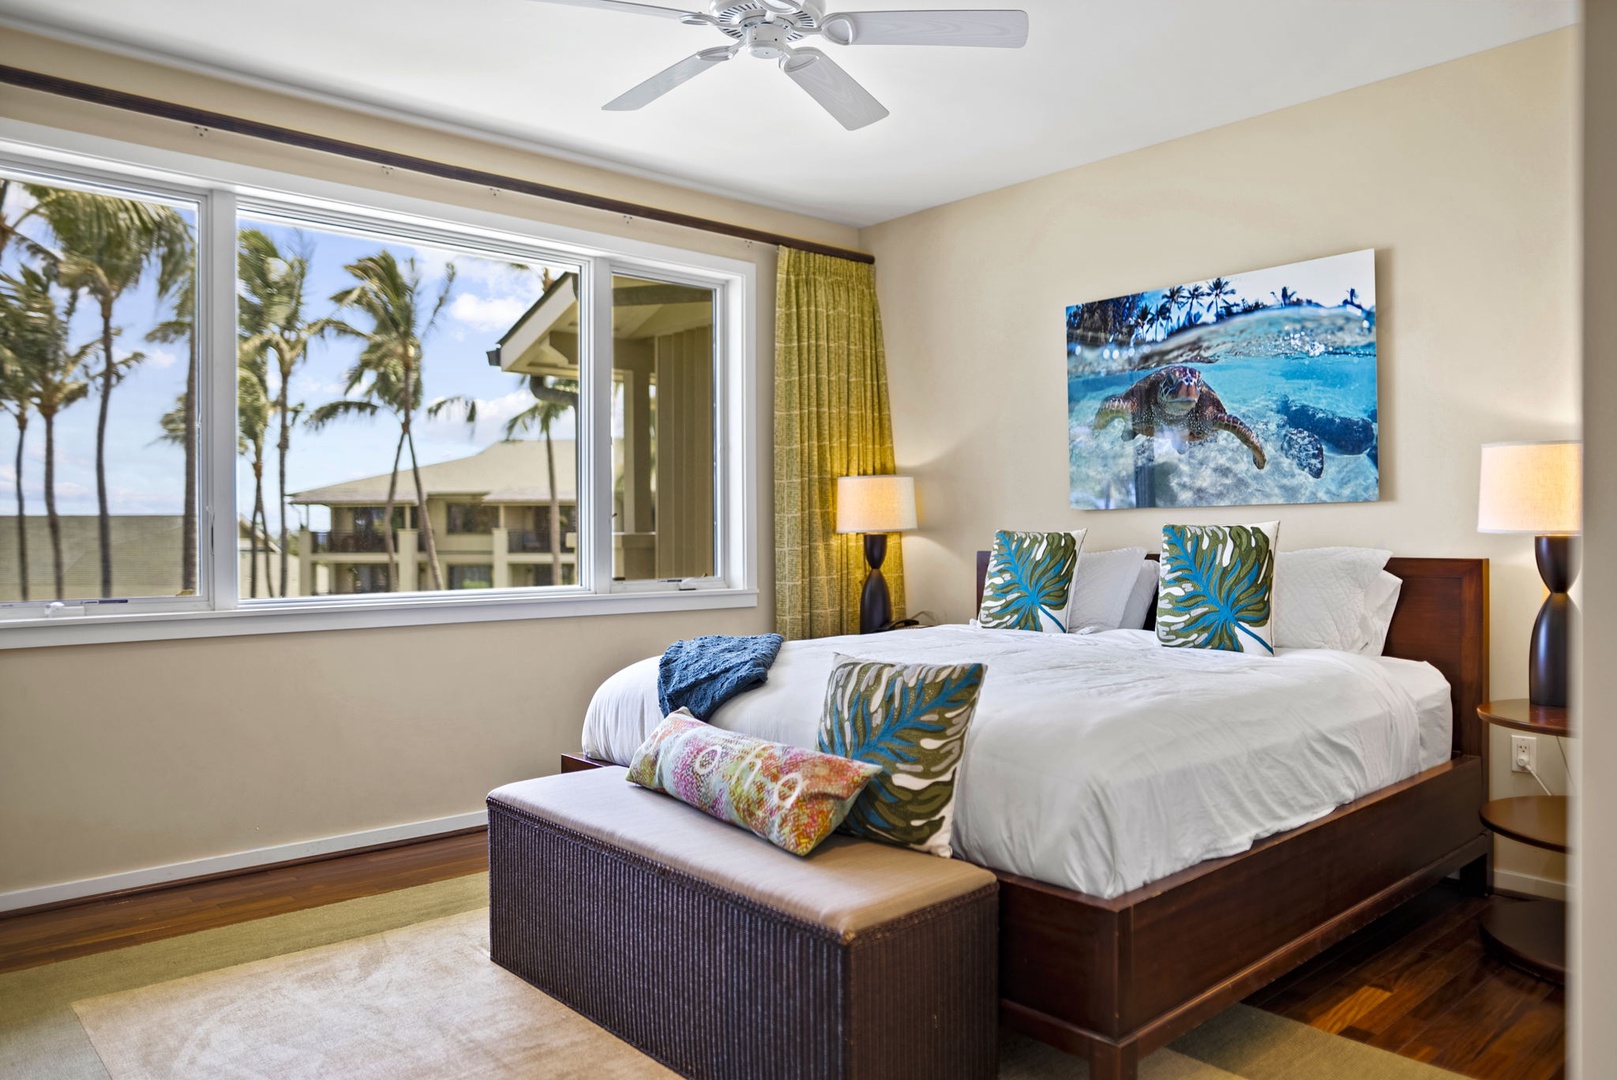 Kahuku Vacation Rentals, Turtle Bay Villas 307 - Kick back in the newly remodeled primary suite and enjoy a movie on the flatscreen television while laying on your king-size bed